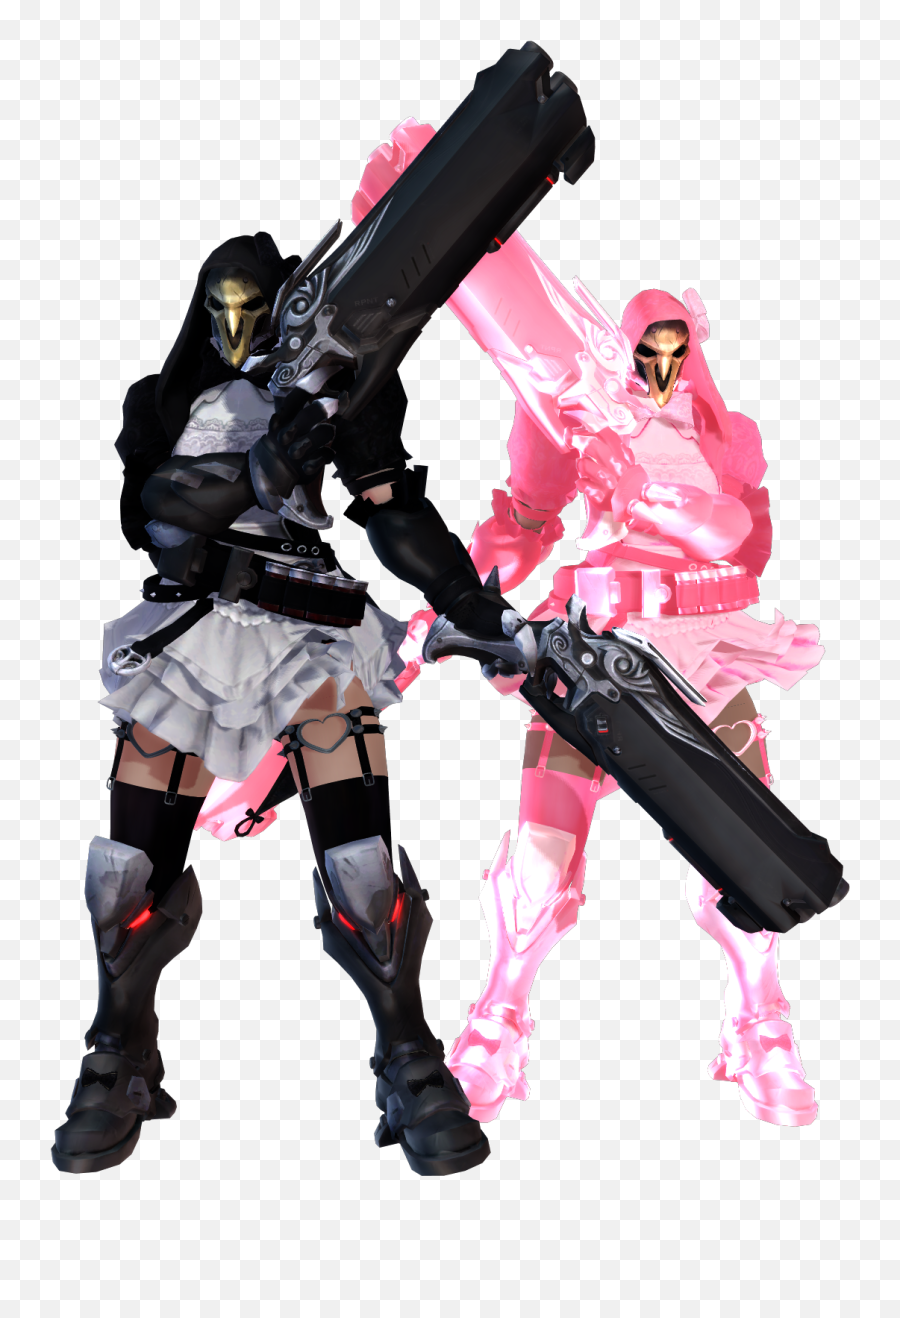 Overwatch Reaper - Cool Reaper Costumes Overwatch Png,Reaper Overwatch Png